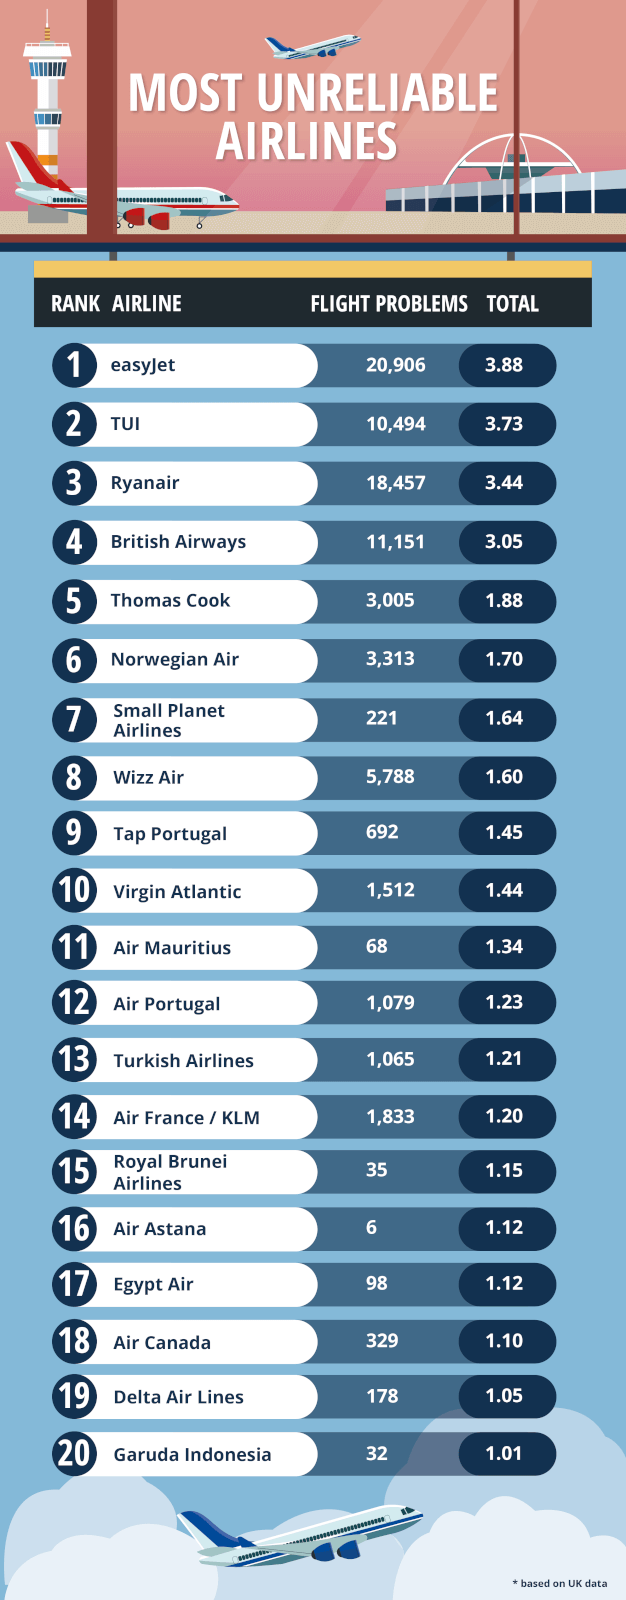 Table showing the most unreliable airlines in the United Kingdom.